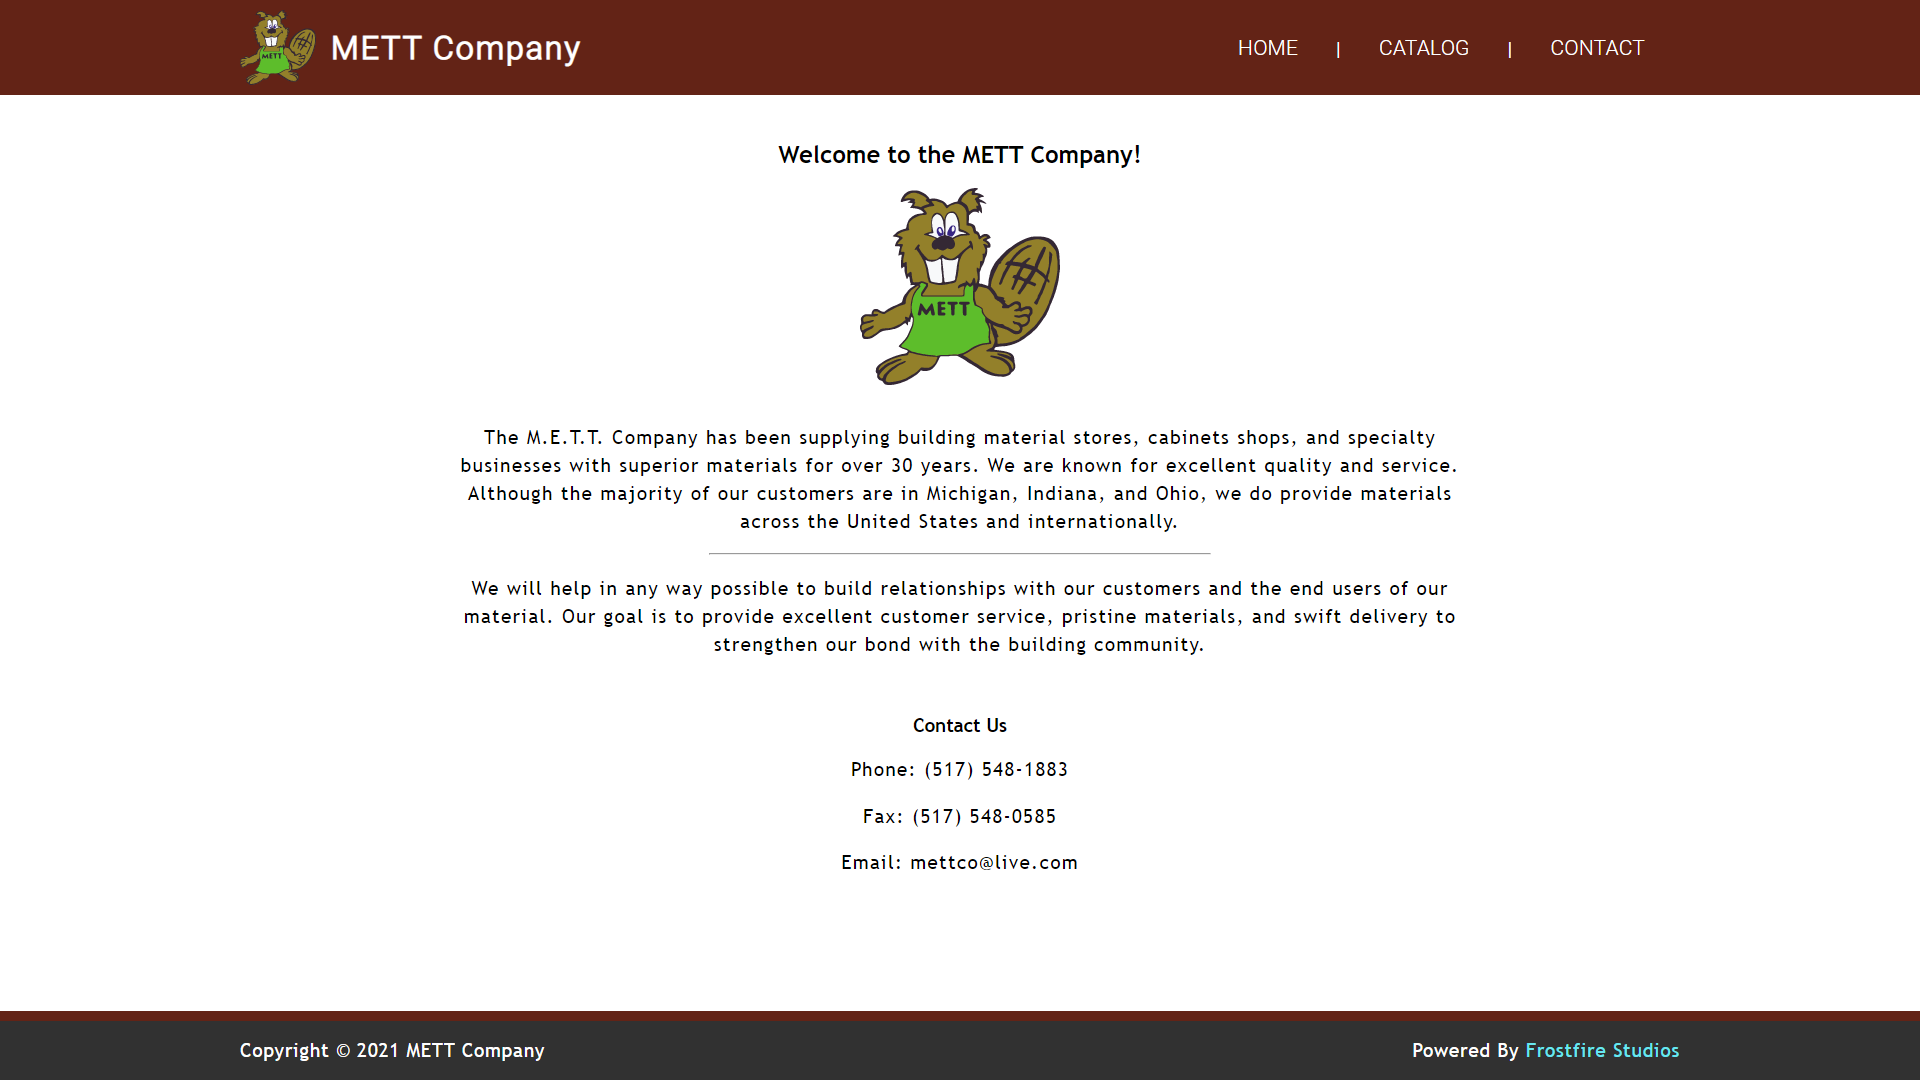 Website for the METT Company